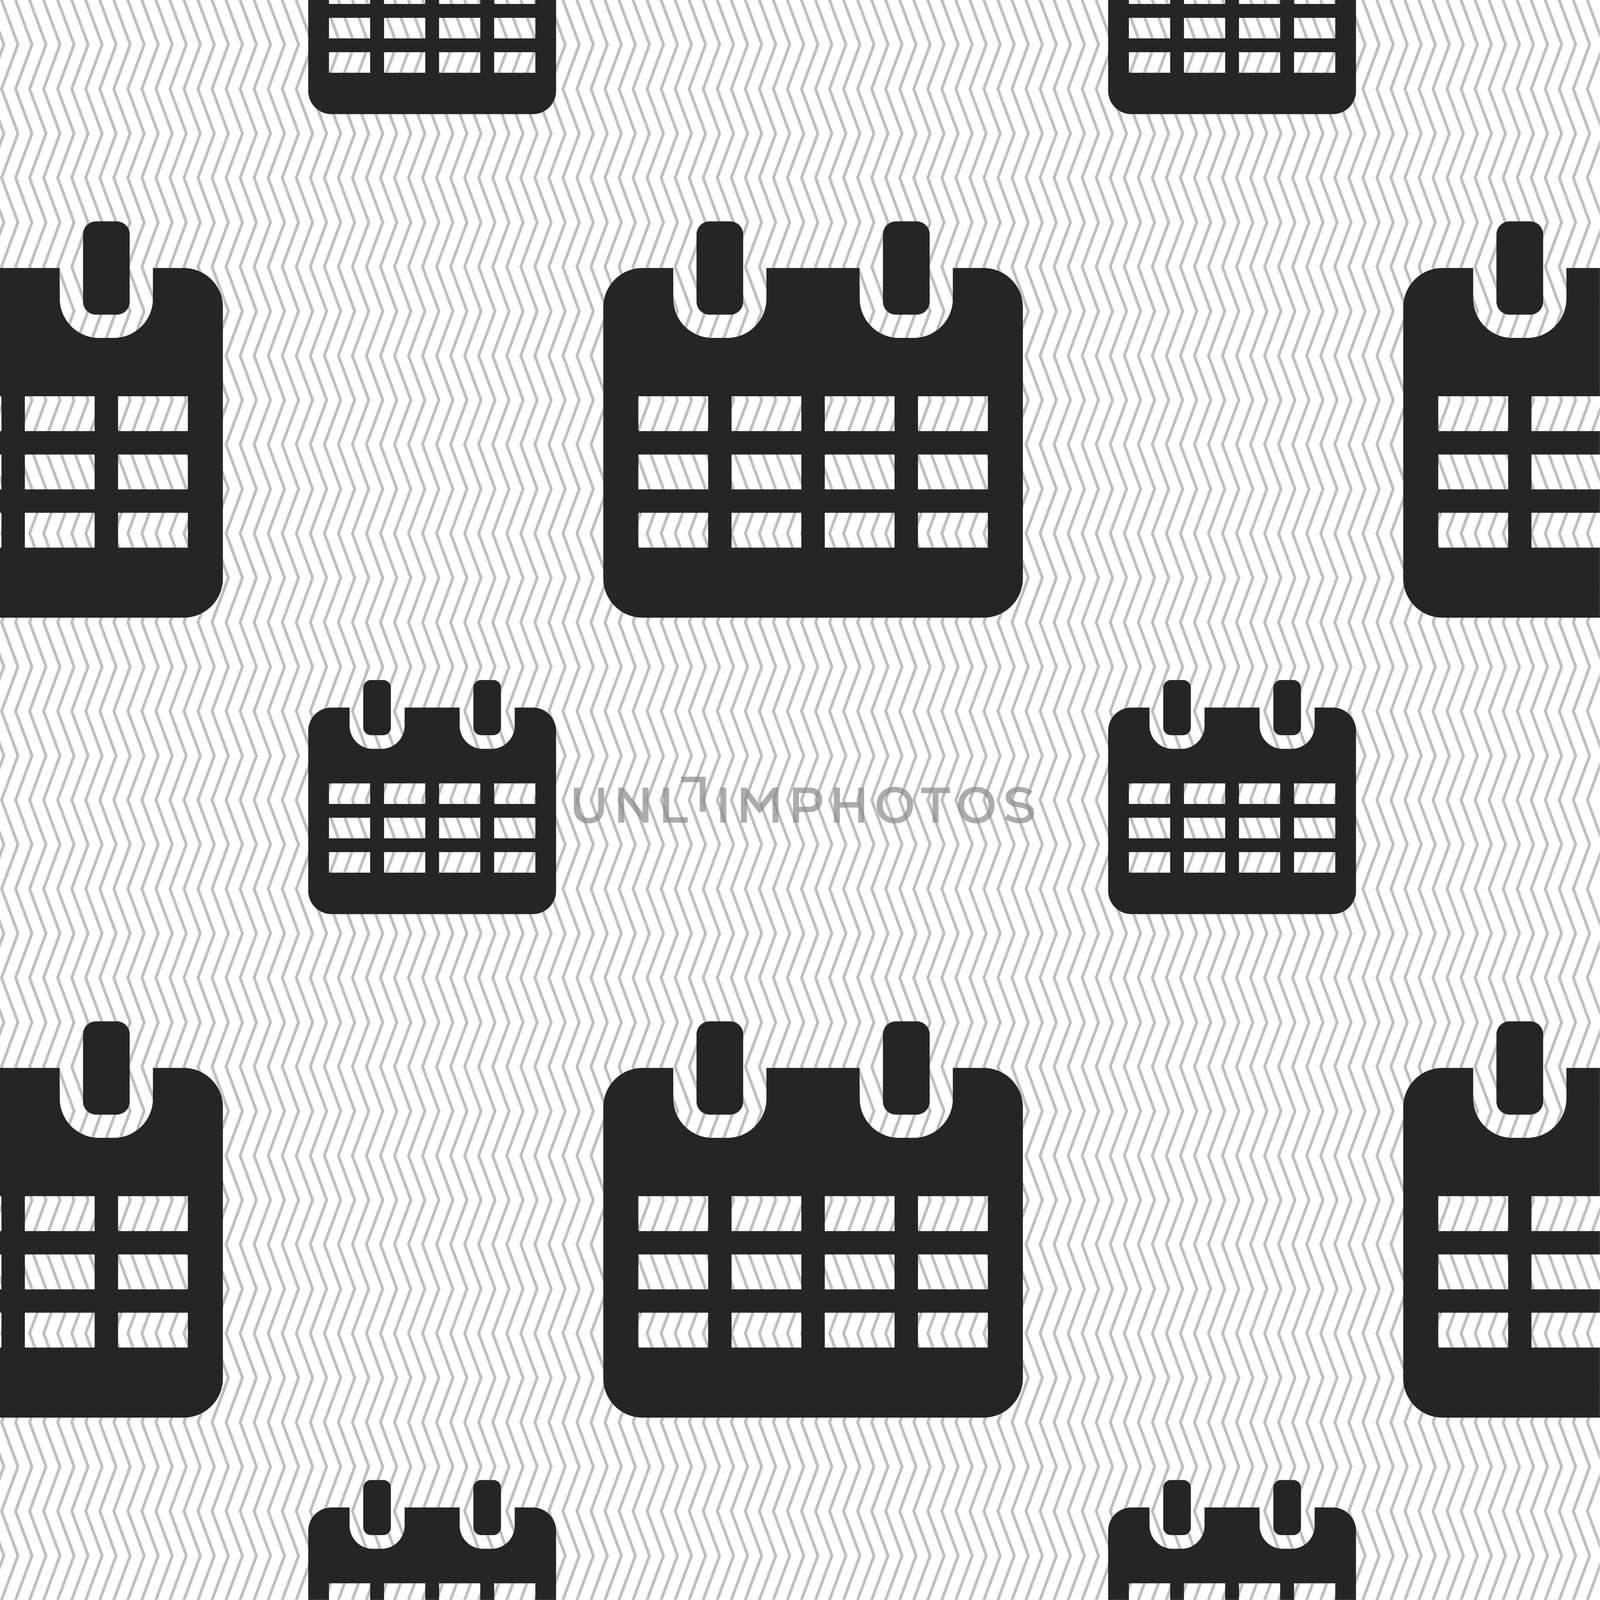  Calendar, Date or event reminder icon sign. Seamless pattern with geometric texture.  by serhii_lohvyniuk